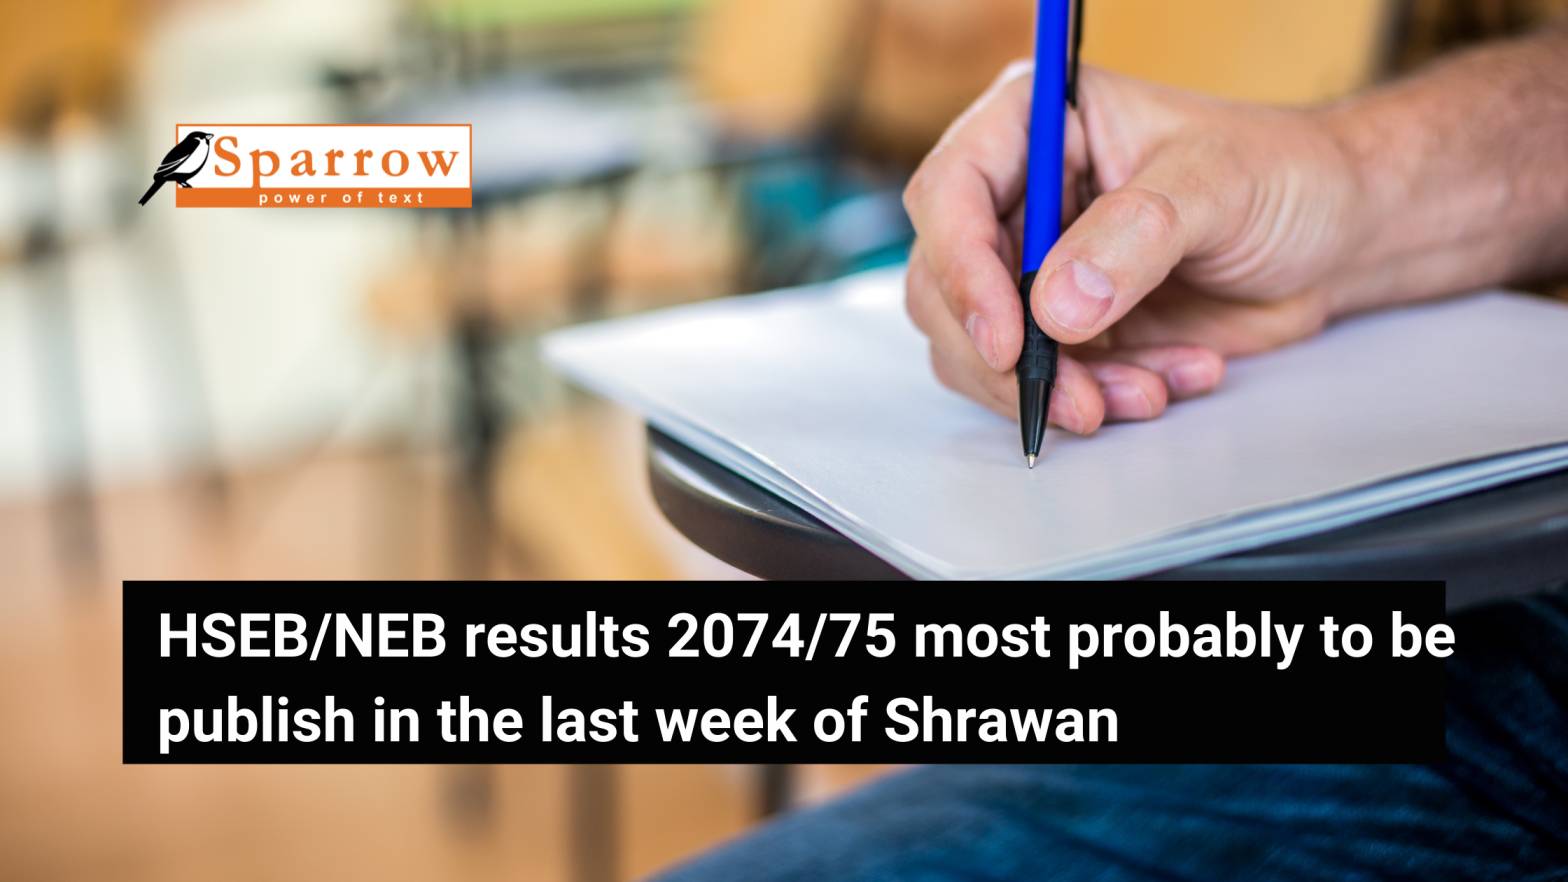 HSEBNEB-results-207475-most-probably-to-be-publish-in-the-last-week-of-Shrawan